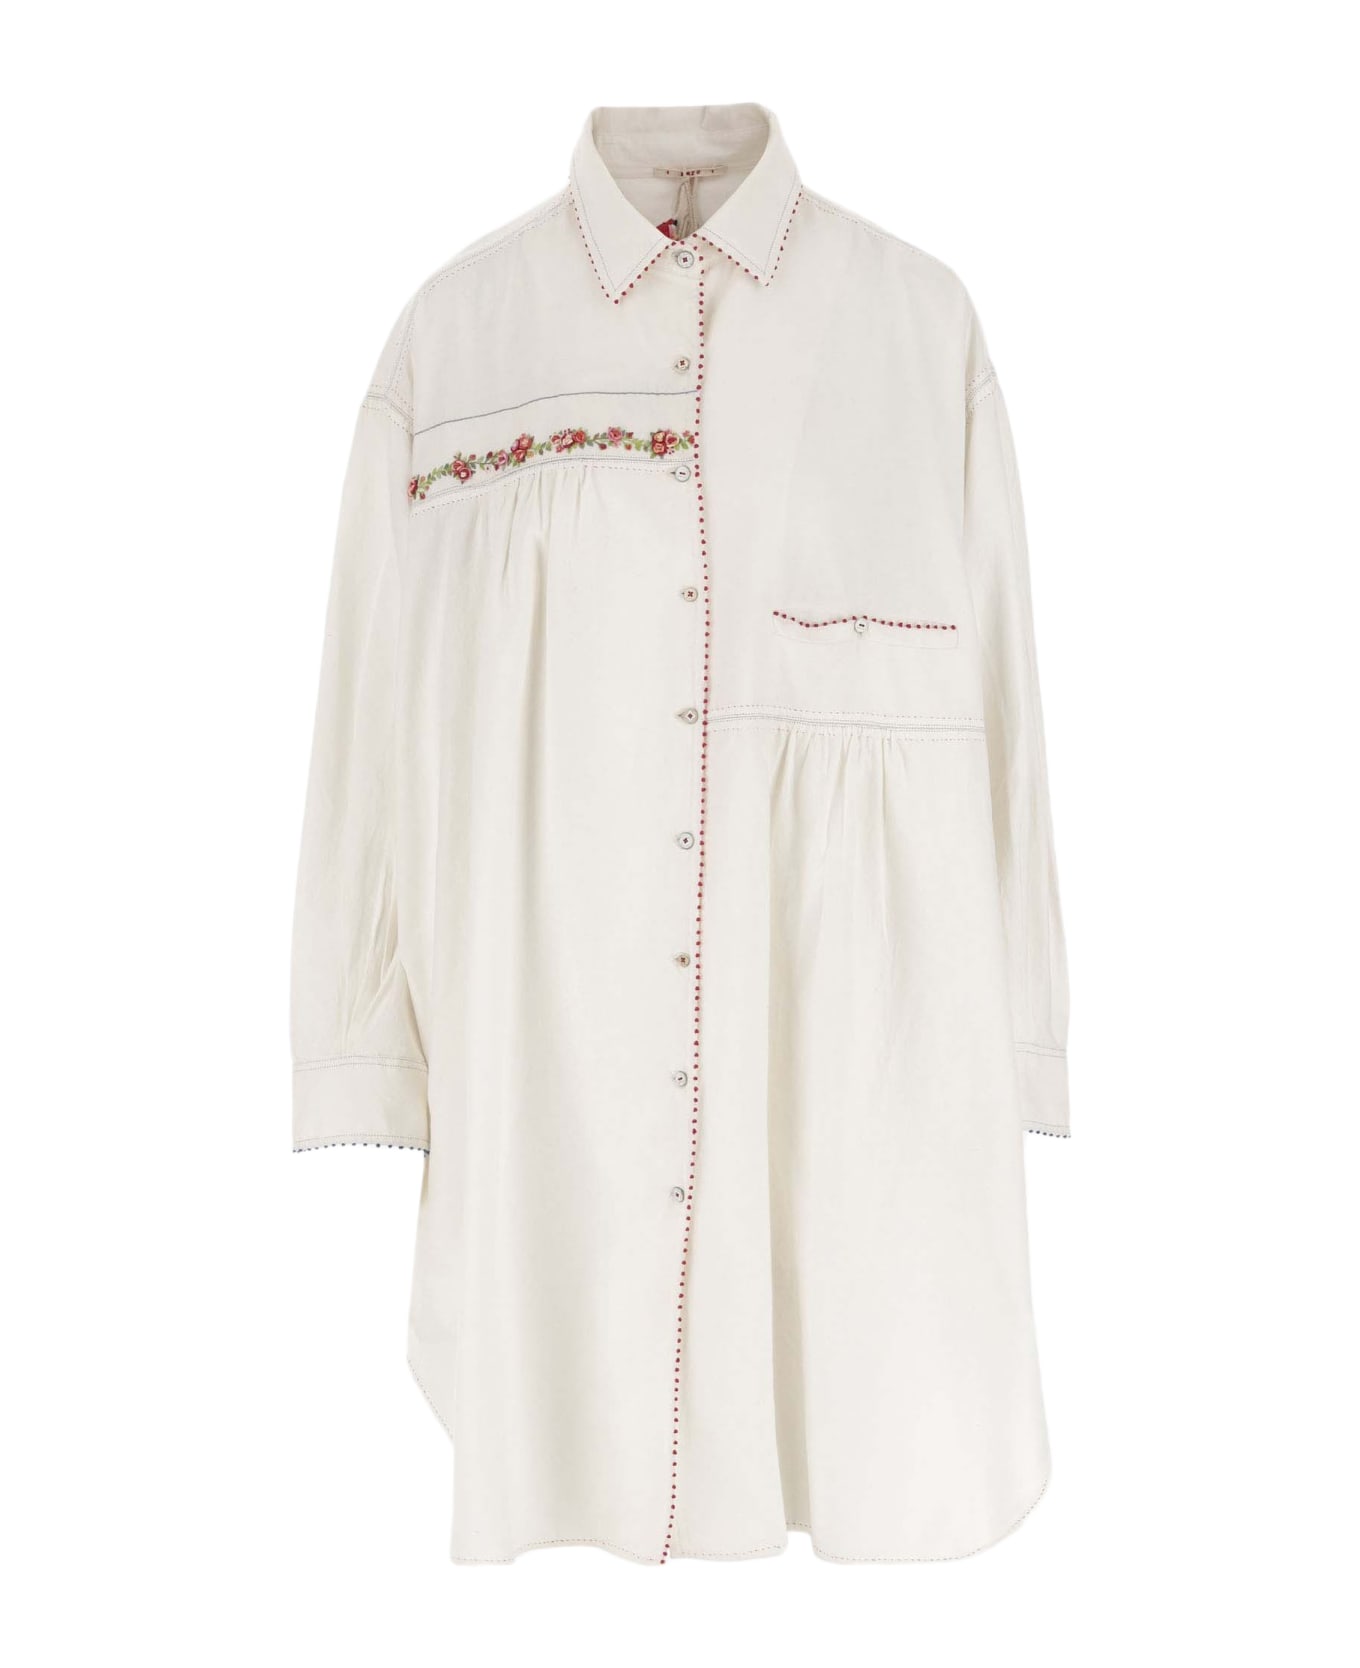 Péro Long Cotton Shirt With Floral Embroidery - White シャツ